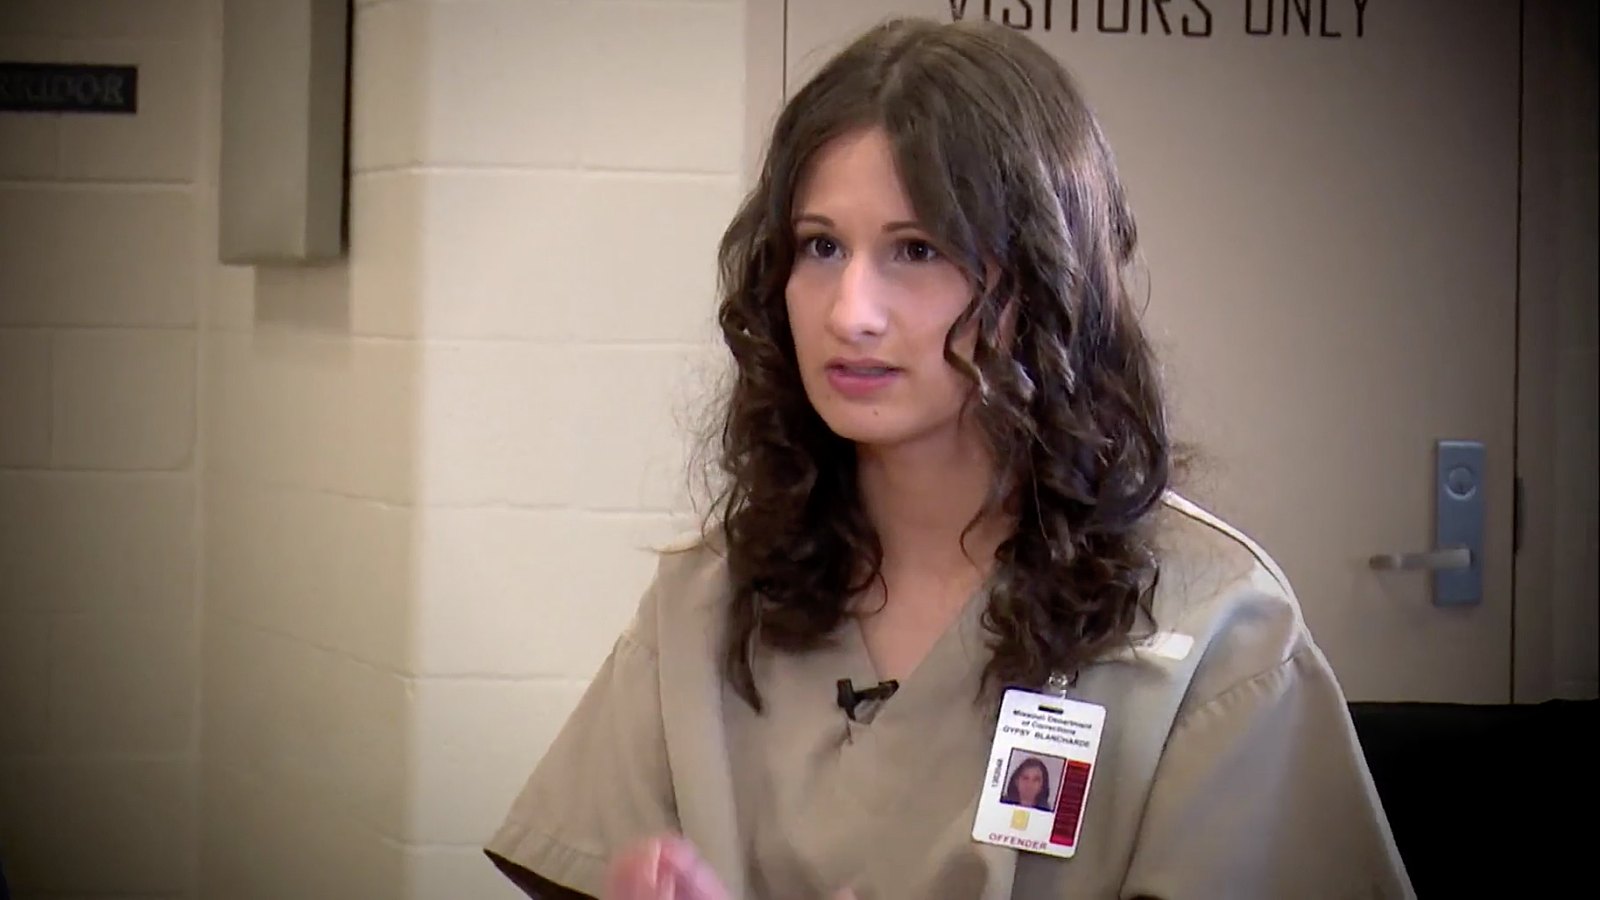 Gypsy Rose Blanchard Will Have an In-Prison Wedding to Fiance Ken